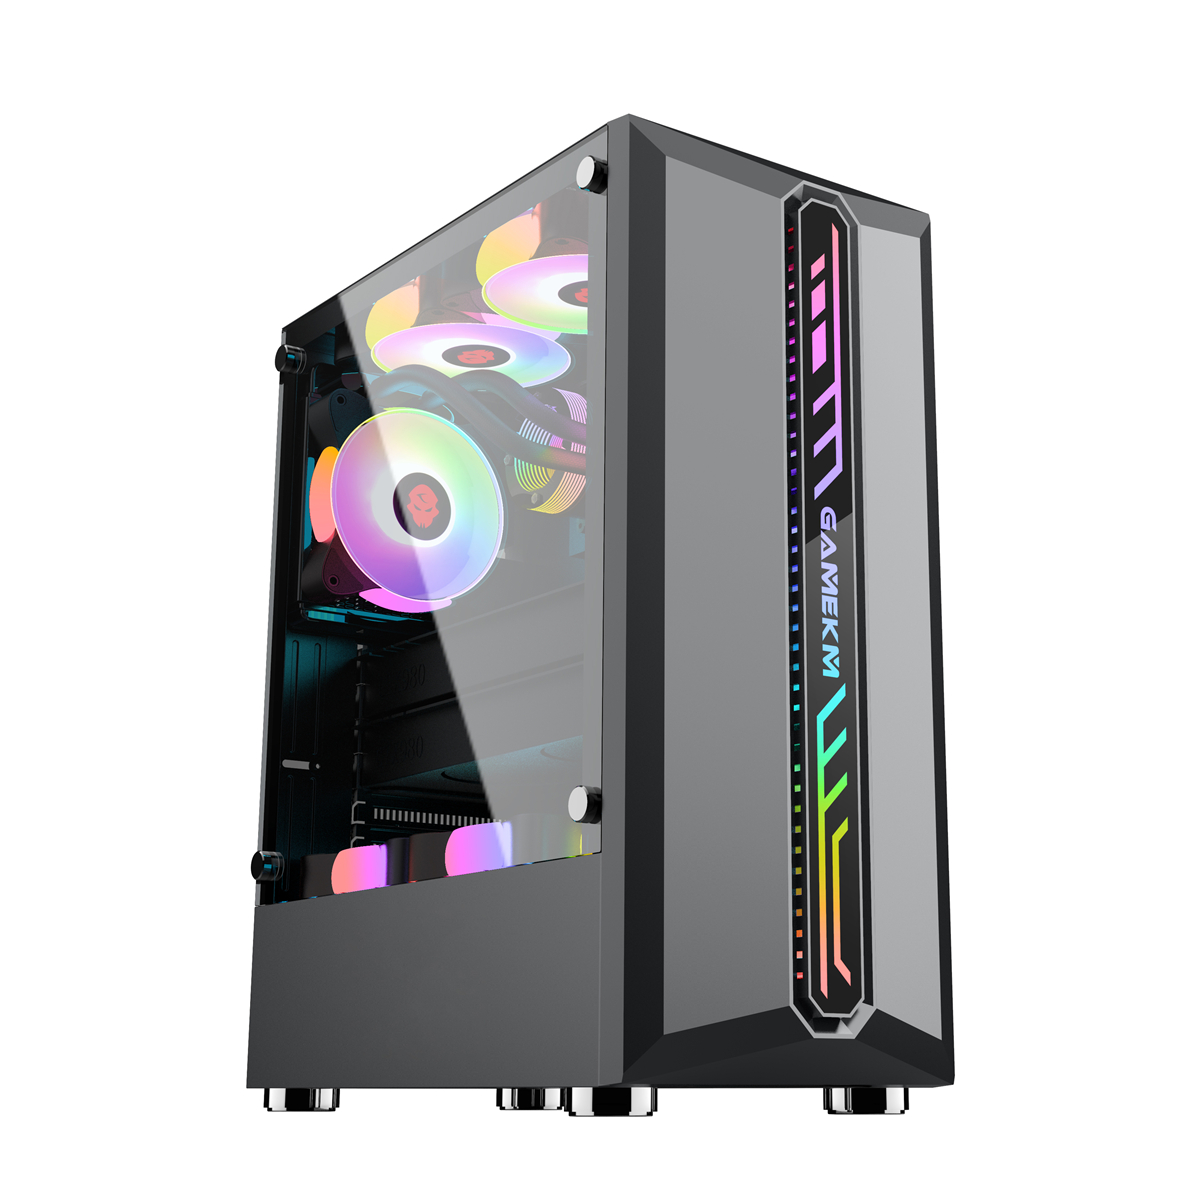 Find GAMEKM Computer Case Mid Tower ATX/M ATX/ITX Acrylic Side Panel RGB Gaming Computer PC Case USB 3 0/USB 2 0/HDD/SSD for Desktop PC Computer for Sale on Gipsybee.com with cryptocurrencies